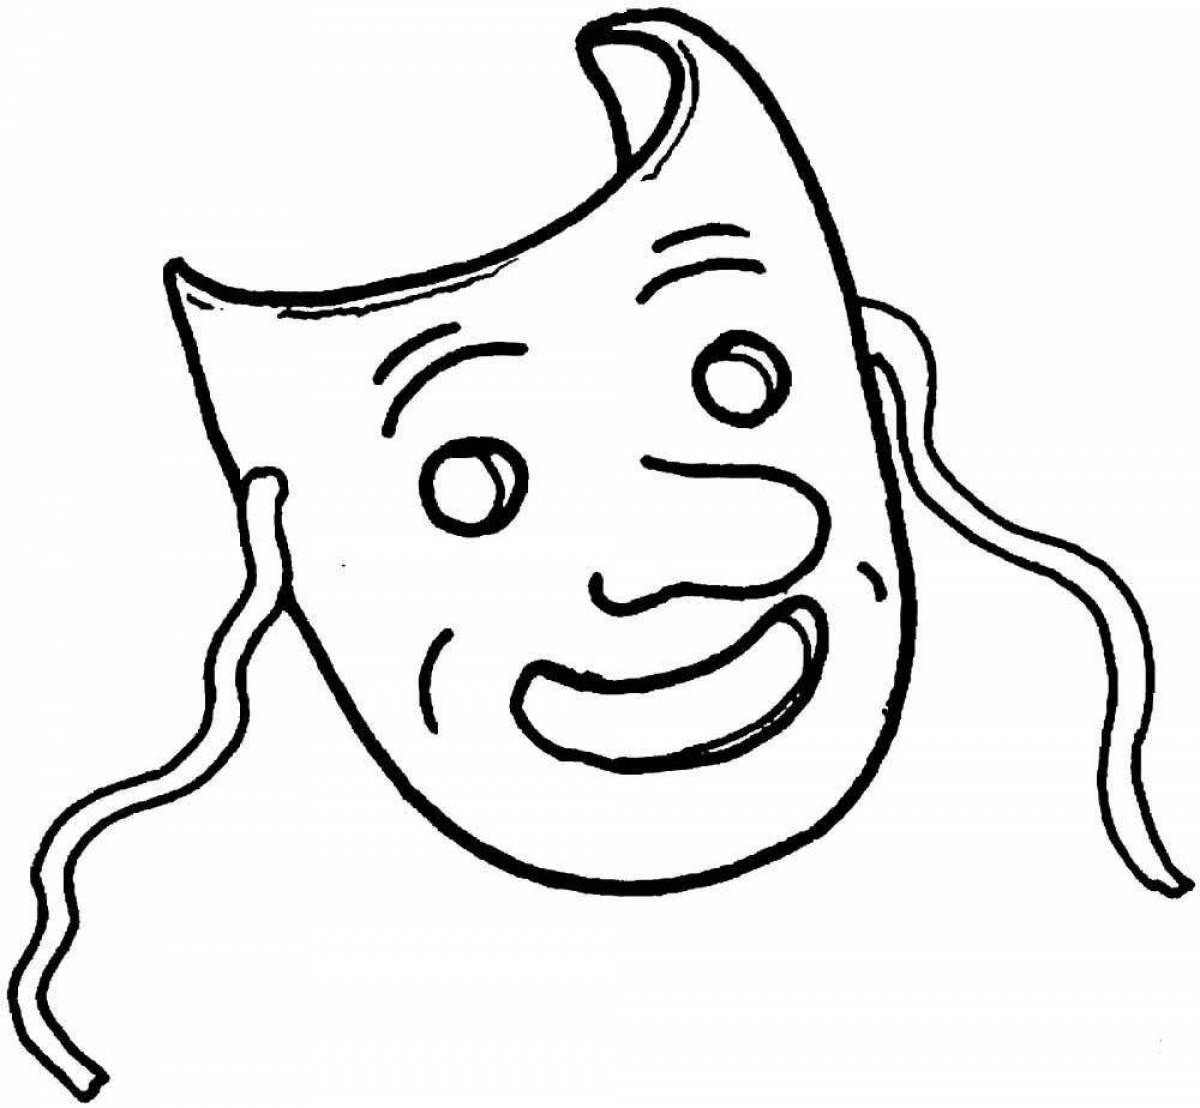 Coloring page bright theatrical mask